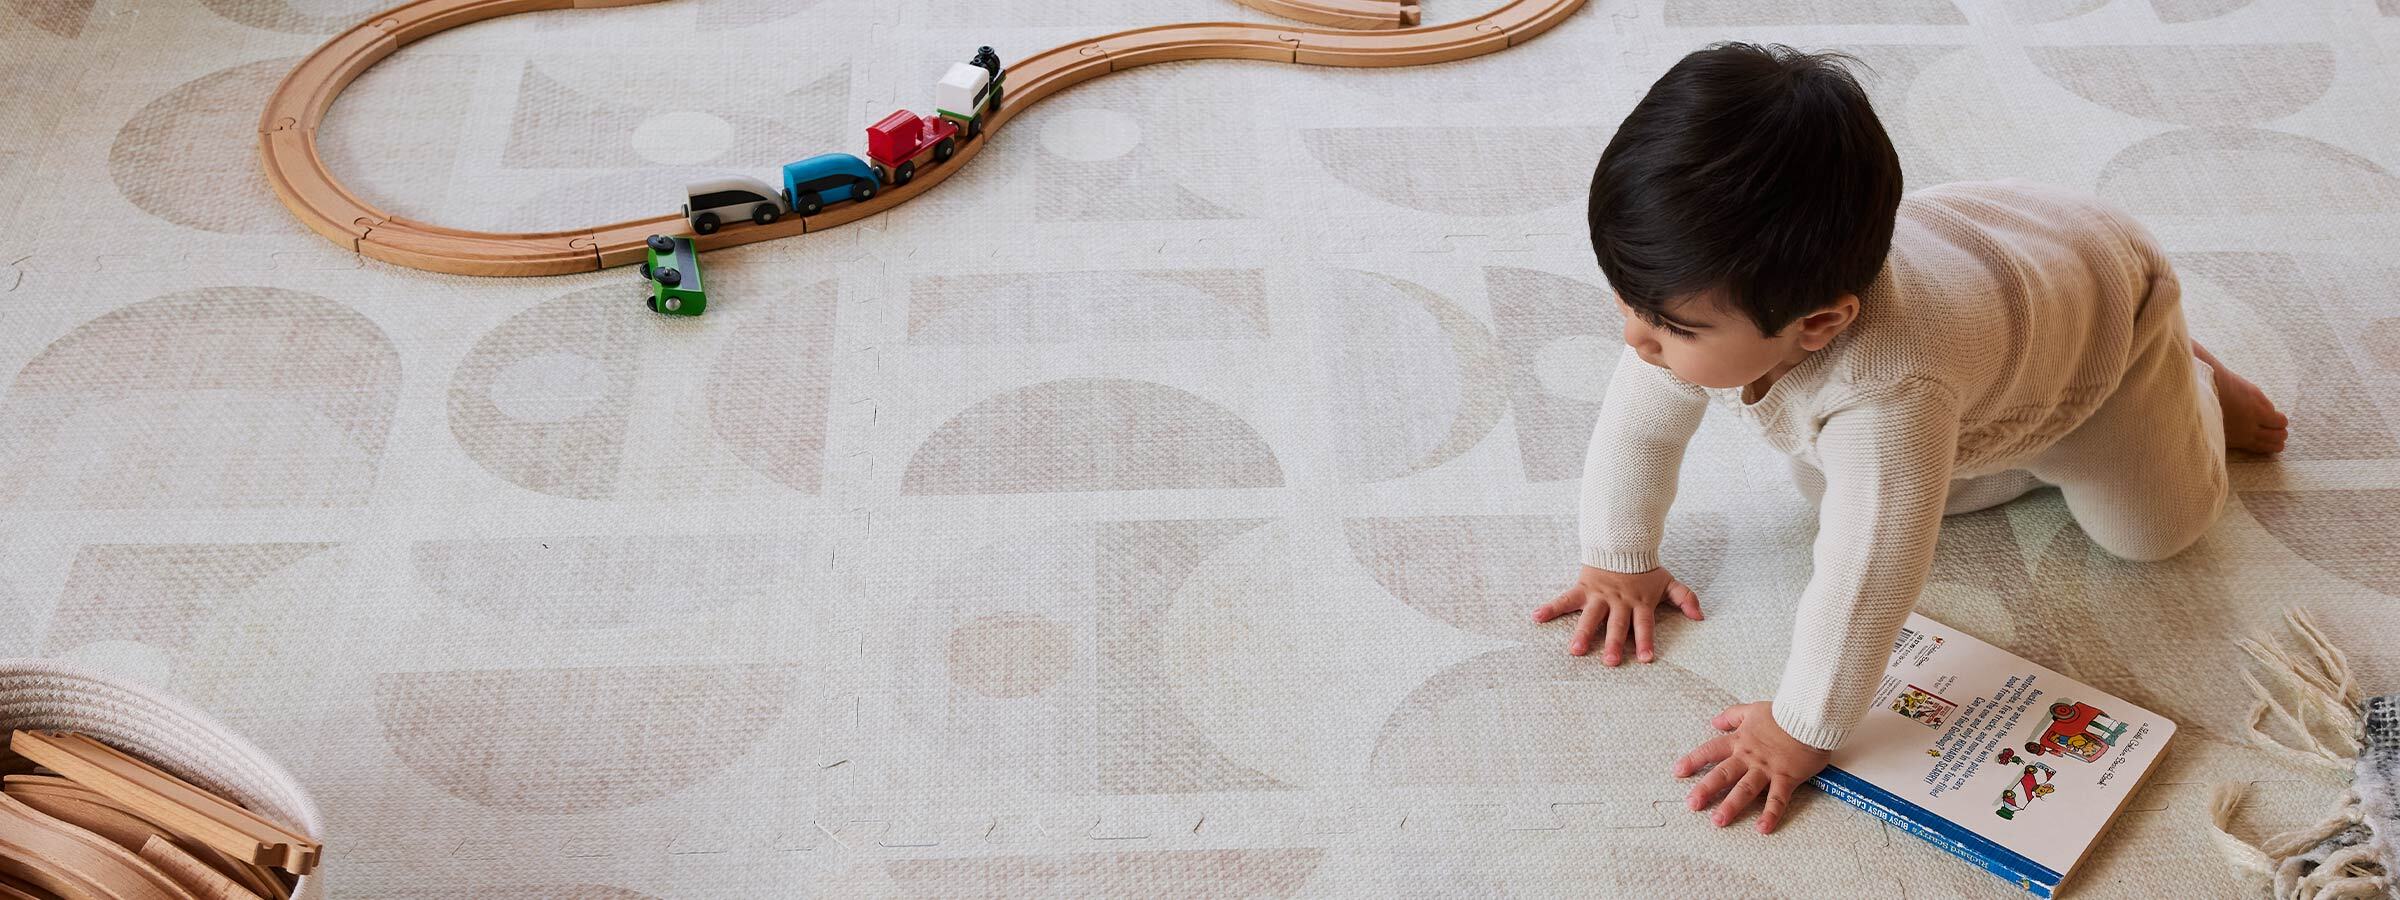 Luna sandstone neutral geometric print play mat with wooden train set, books, and baby boy crawling across the mat